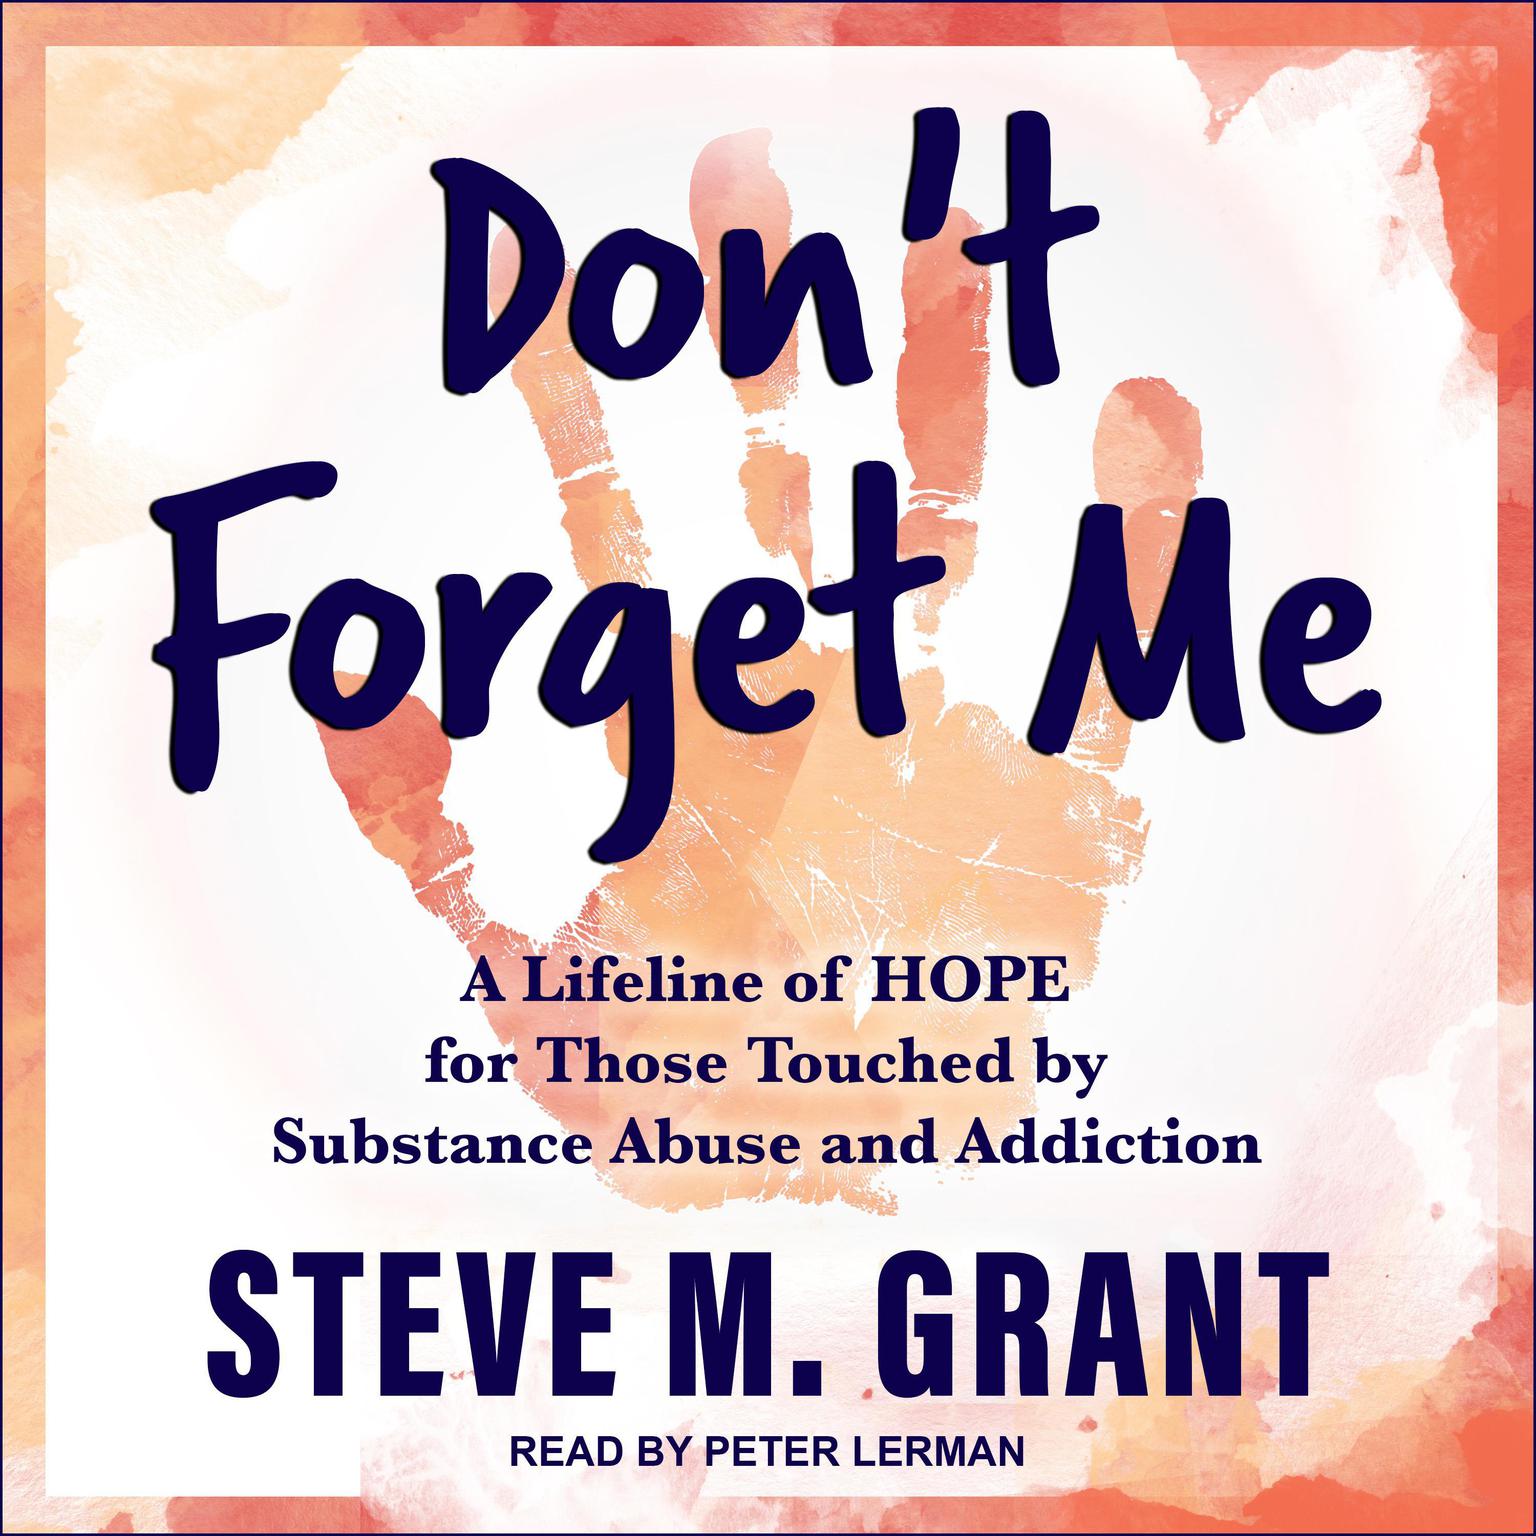 Dont Forget Me: A Lifeline of HOPE for Those Touched by Substance Abuse and Addiction Audiobook, by Steve M. Grant